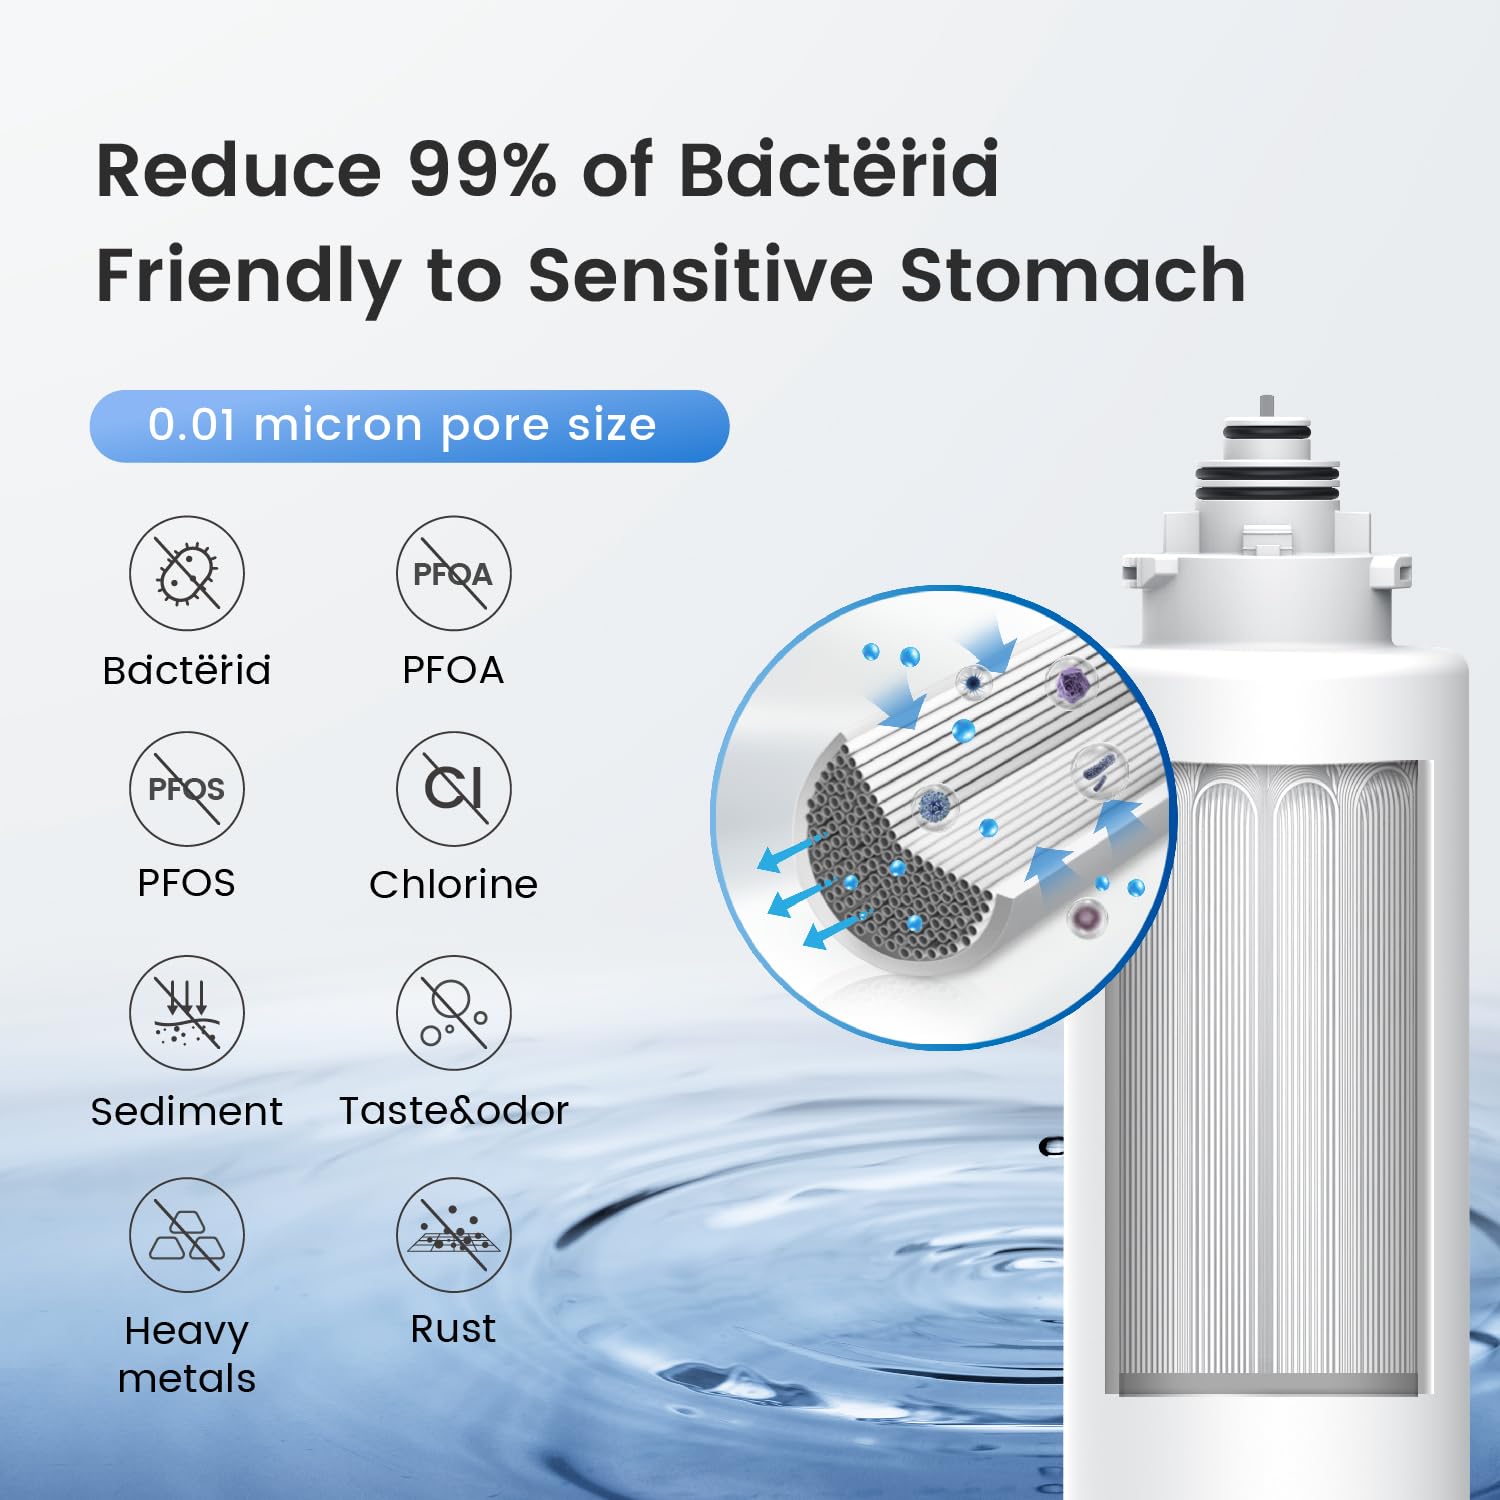 Waterdrop TSU 0.01μm Ultra-Filtration Under Sink Water Filter System, 3-Stage High Capacity, USA Tech, Smart Panel, No Waste Water, 2 Years Lifetime